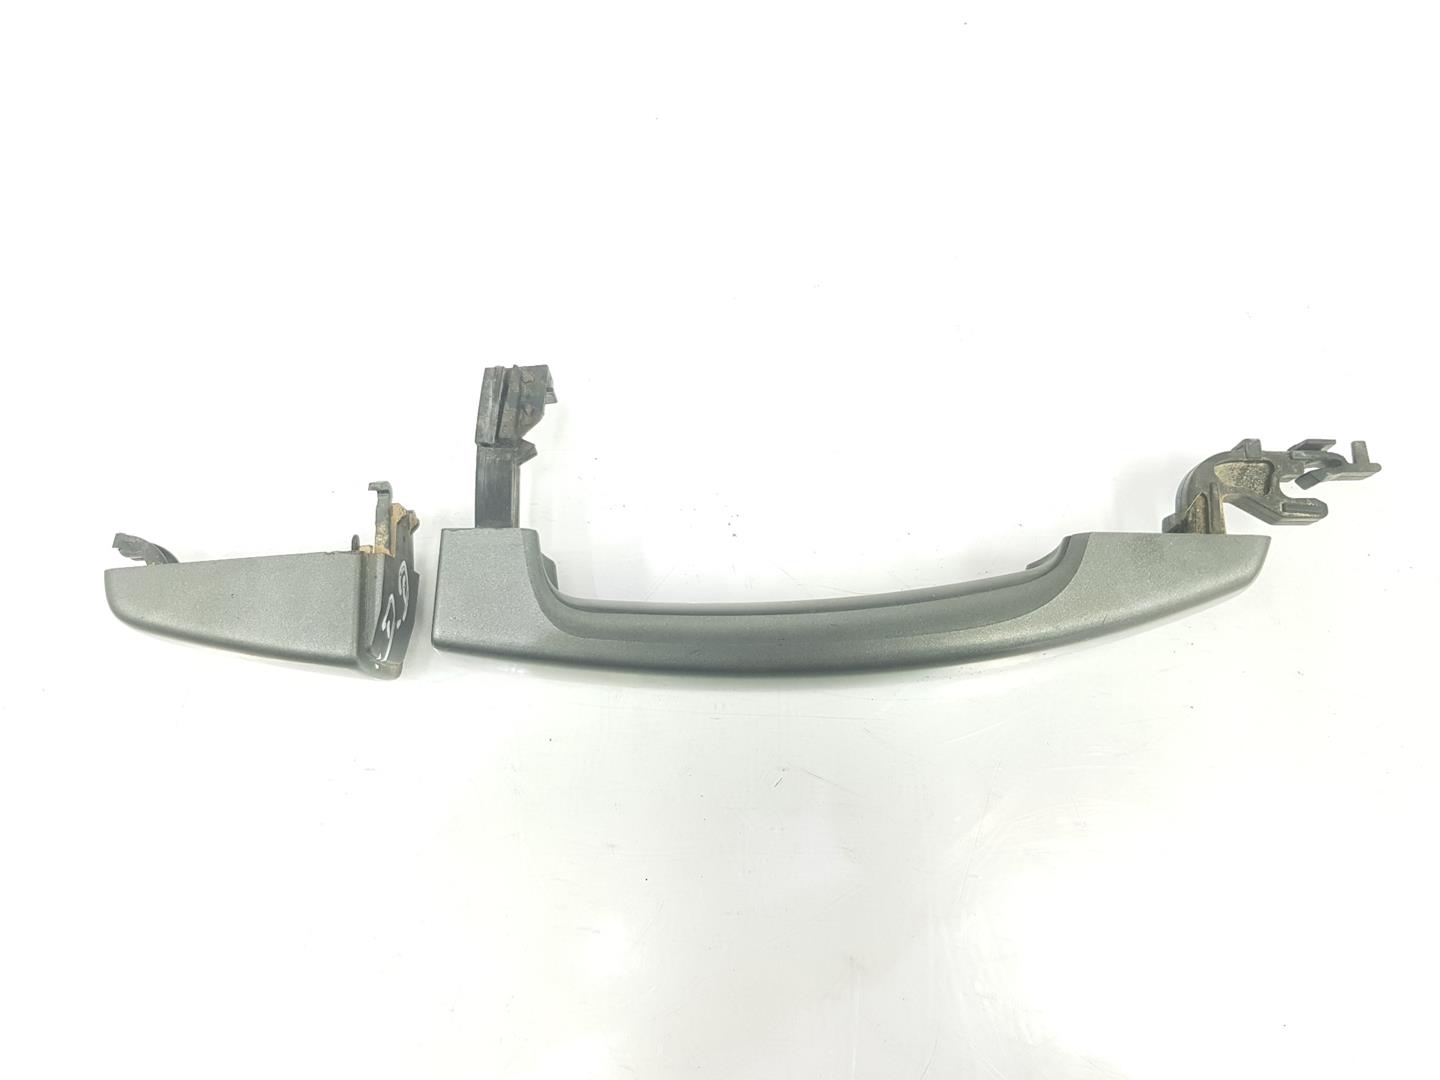 LAND ROVER Discovery 4 generation (2009-2016) Front Right Door Exterior Handle LR020928, AH2222404BC8LAE, COLORBRONCE 24131098